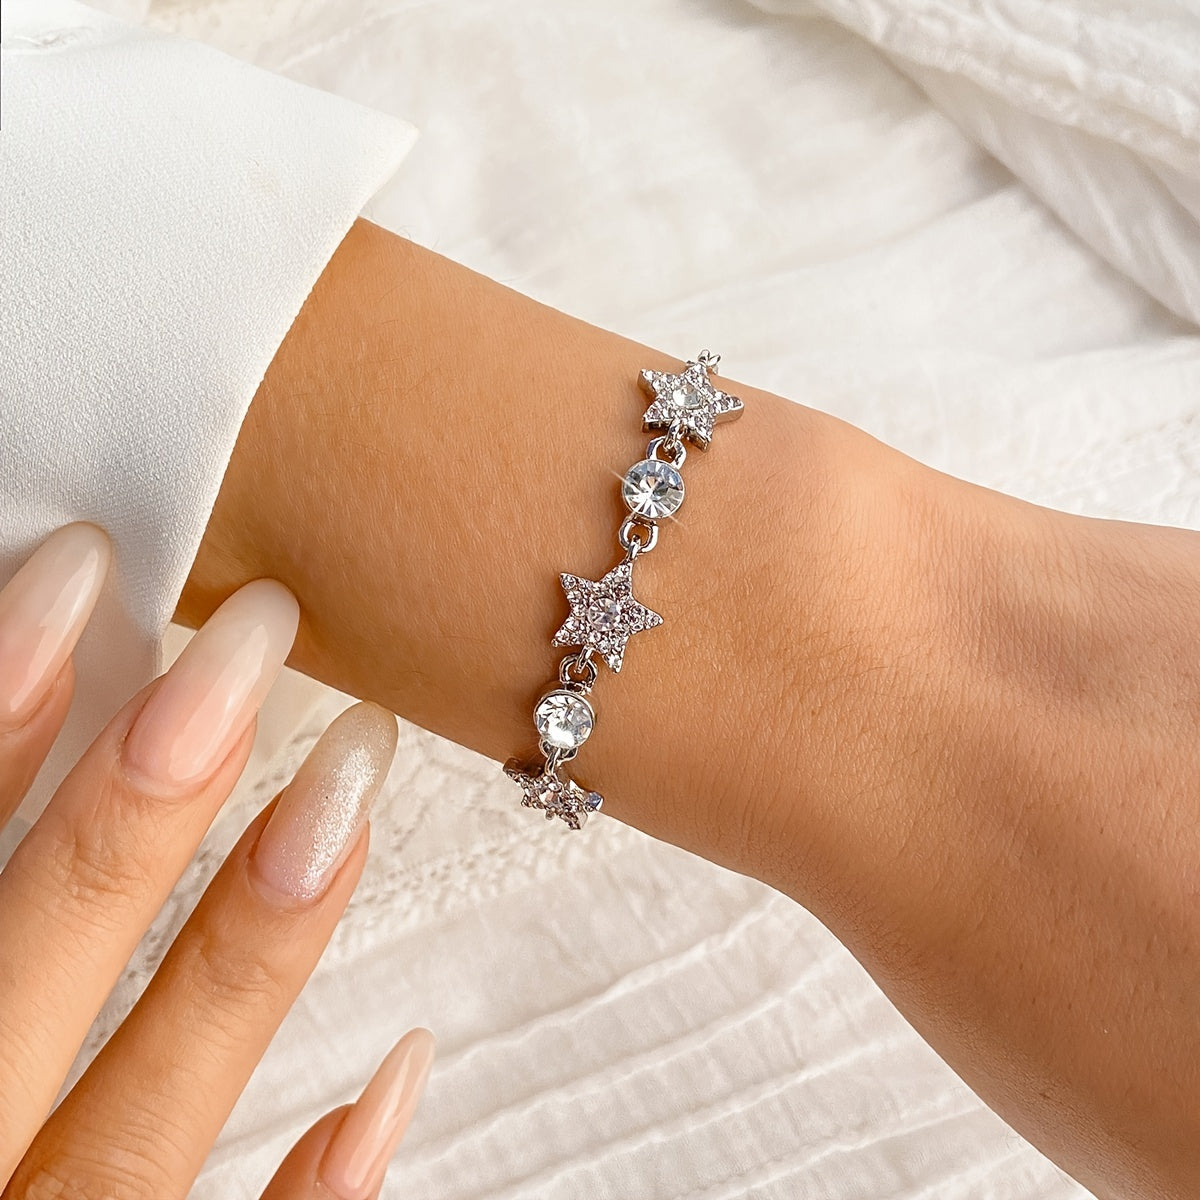 Shine like a Star with our Adjustable Shiny Chain Bracelet Inlaid with Rhinestones for Hand Jewelry Decoration